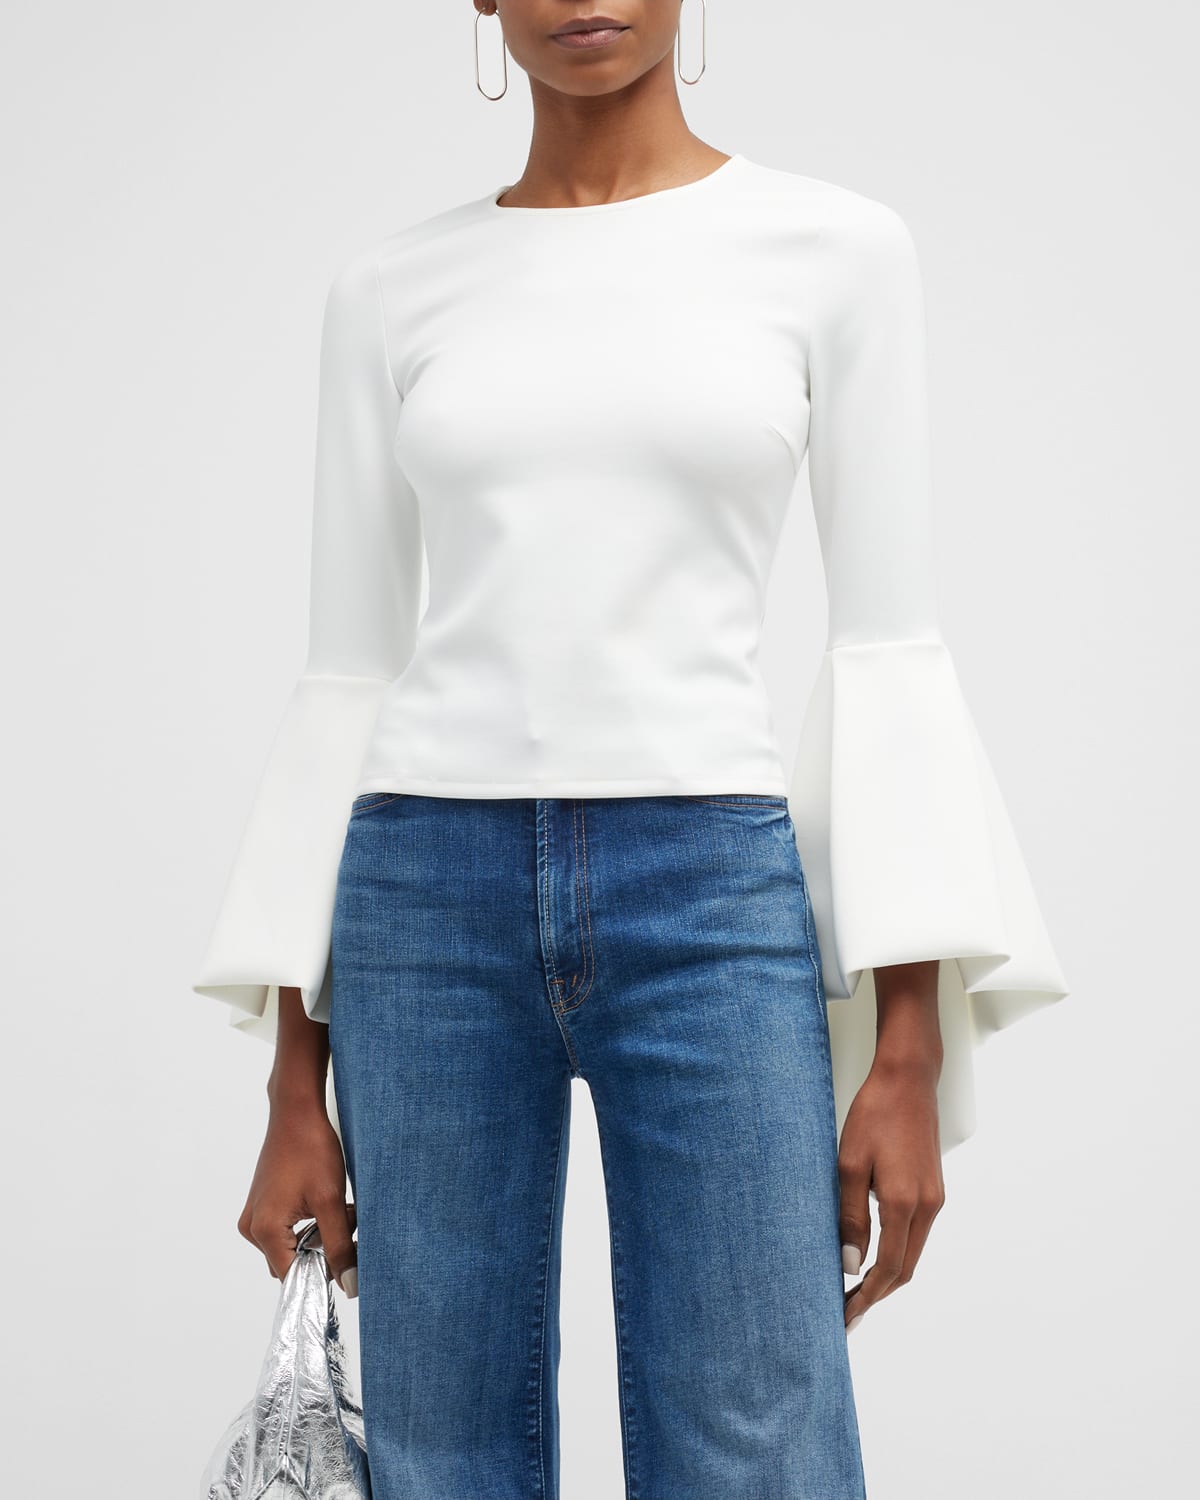 L'Agence Chase Ruffle-Sleeve Top